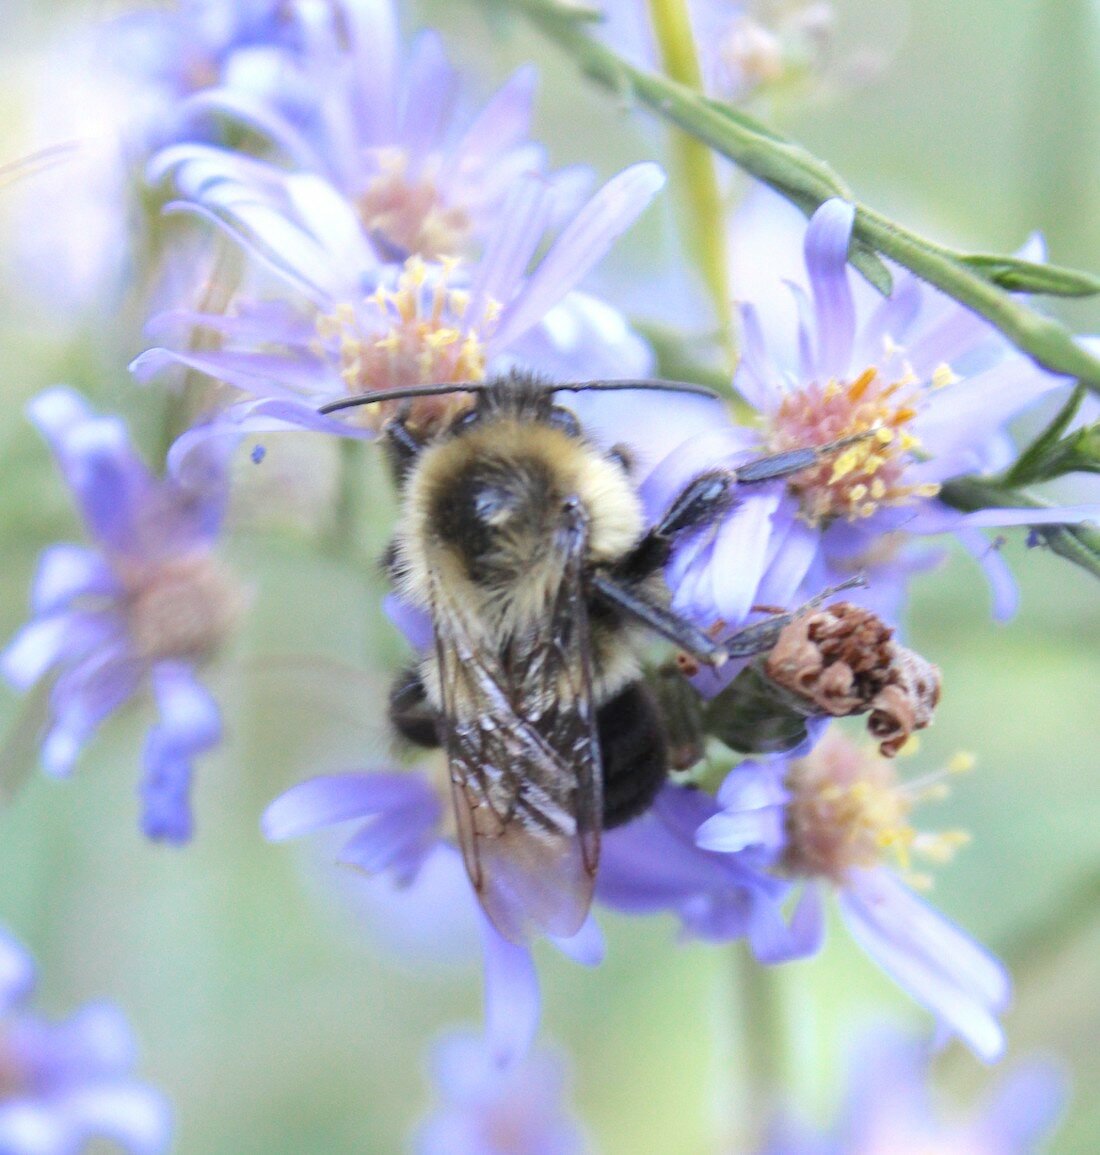 Working to advance its own interests at the Grey Cloud Dunes, this bumblebee on a sky blue aster unwittingly helps the flowers pollinate, including wild grapes on site.